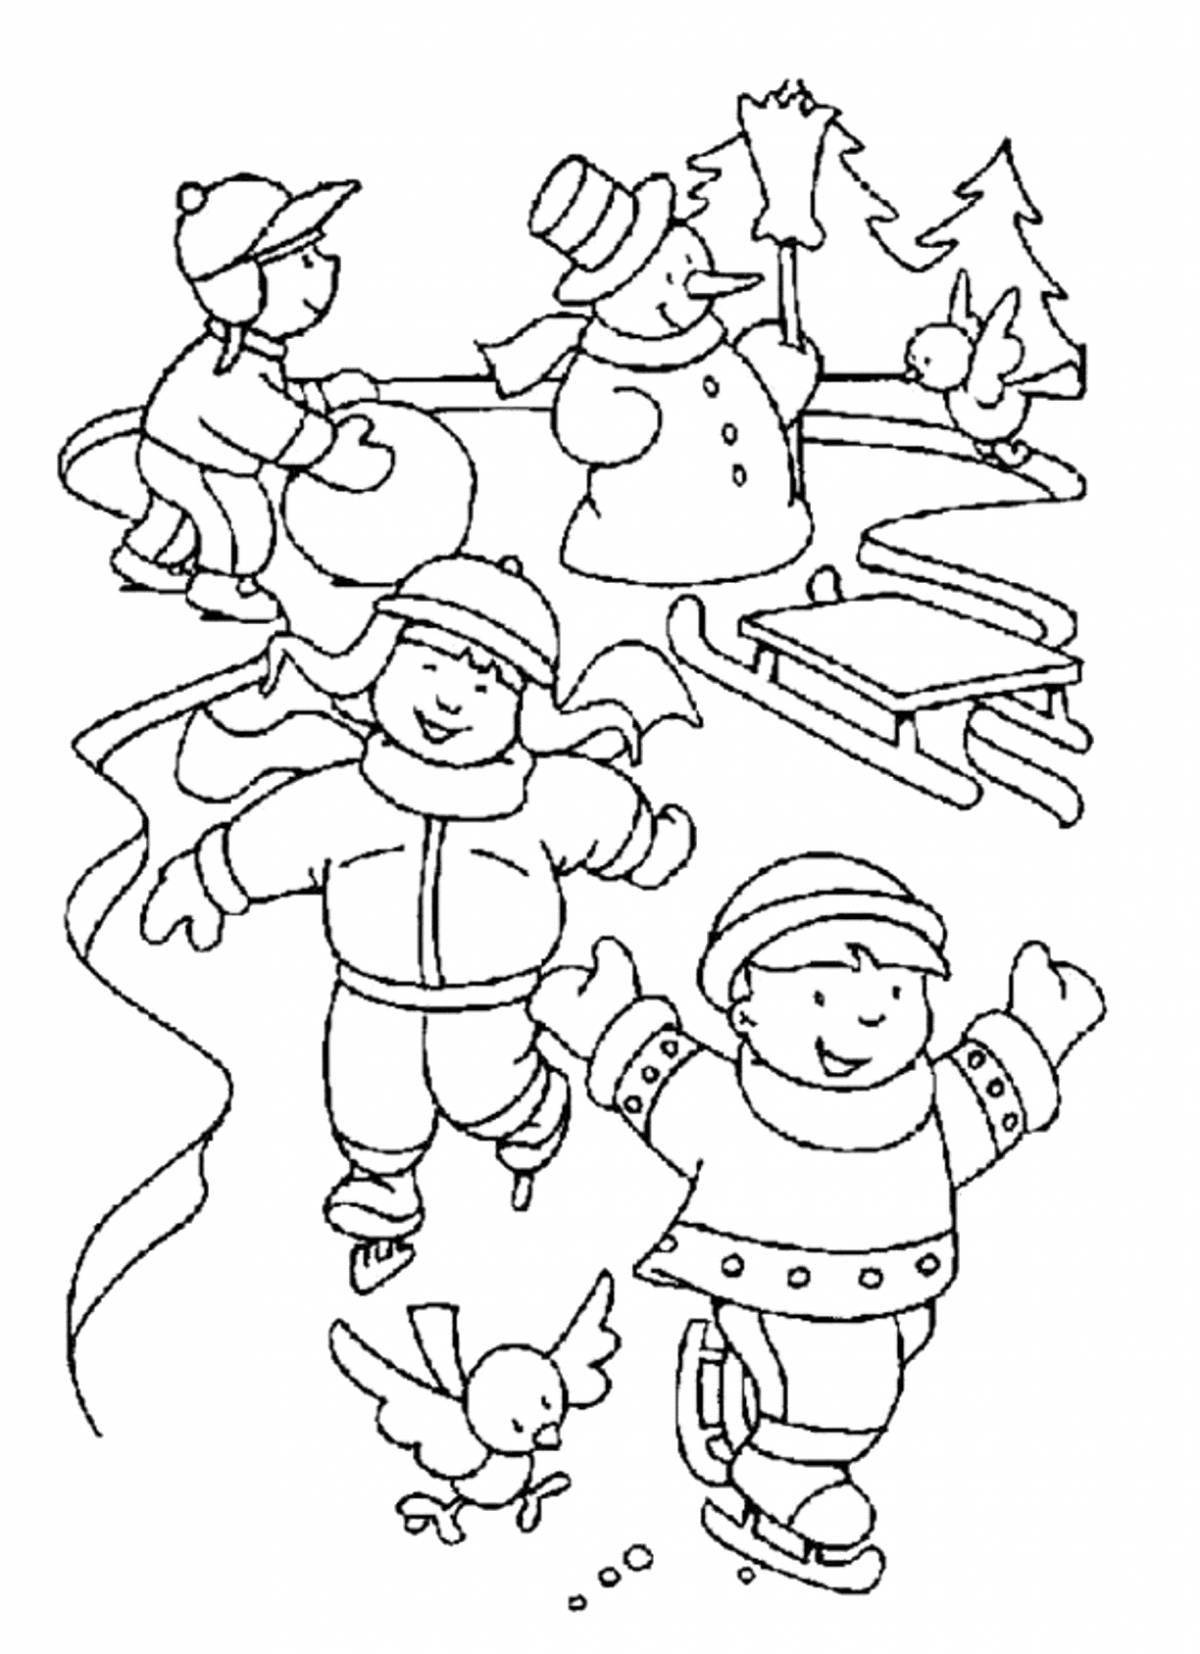 Exquisite coloring book for children in winter